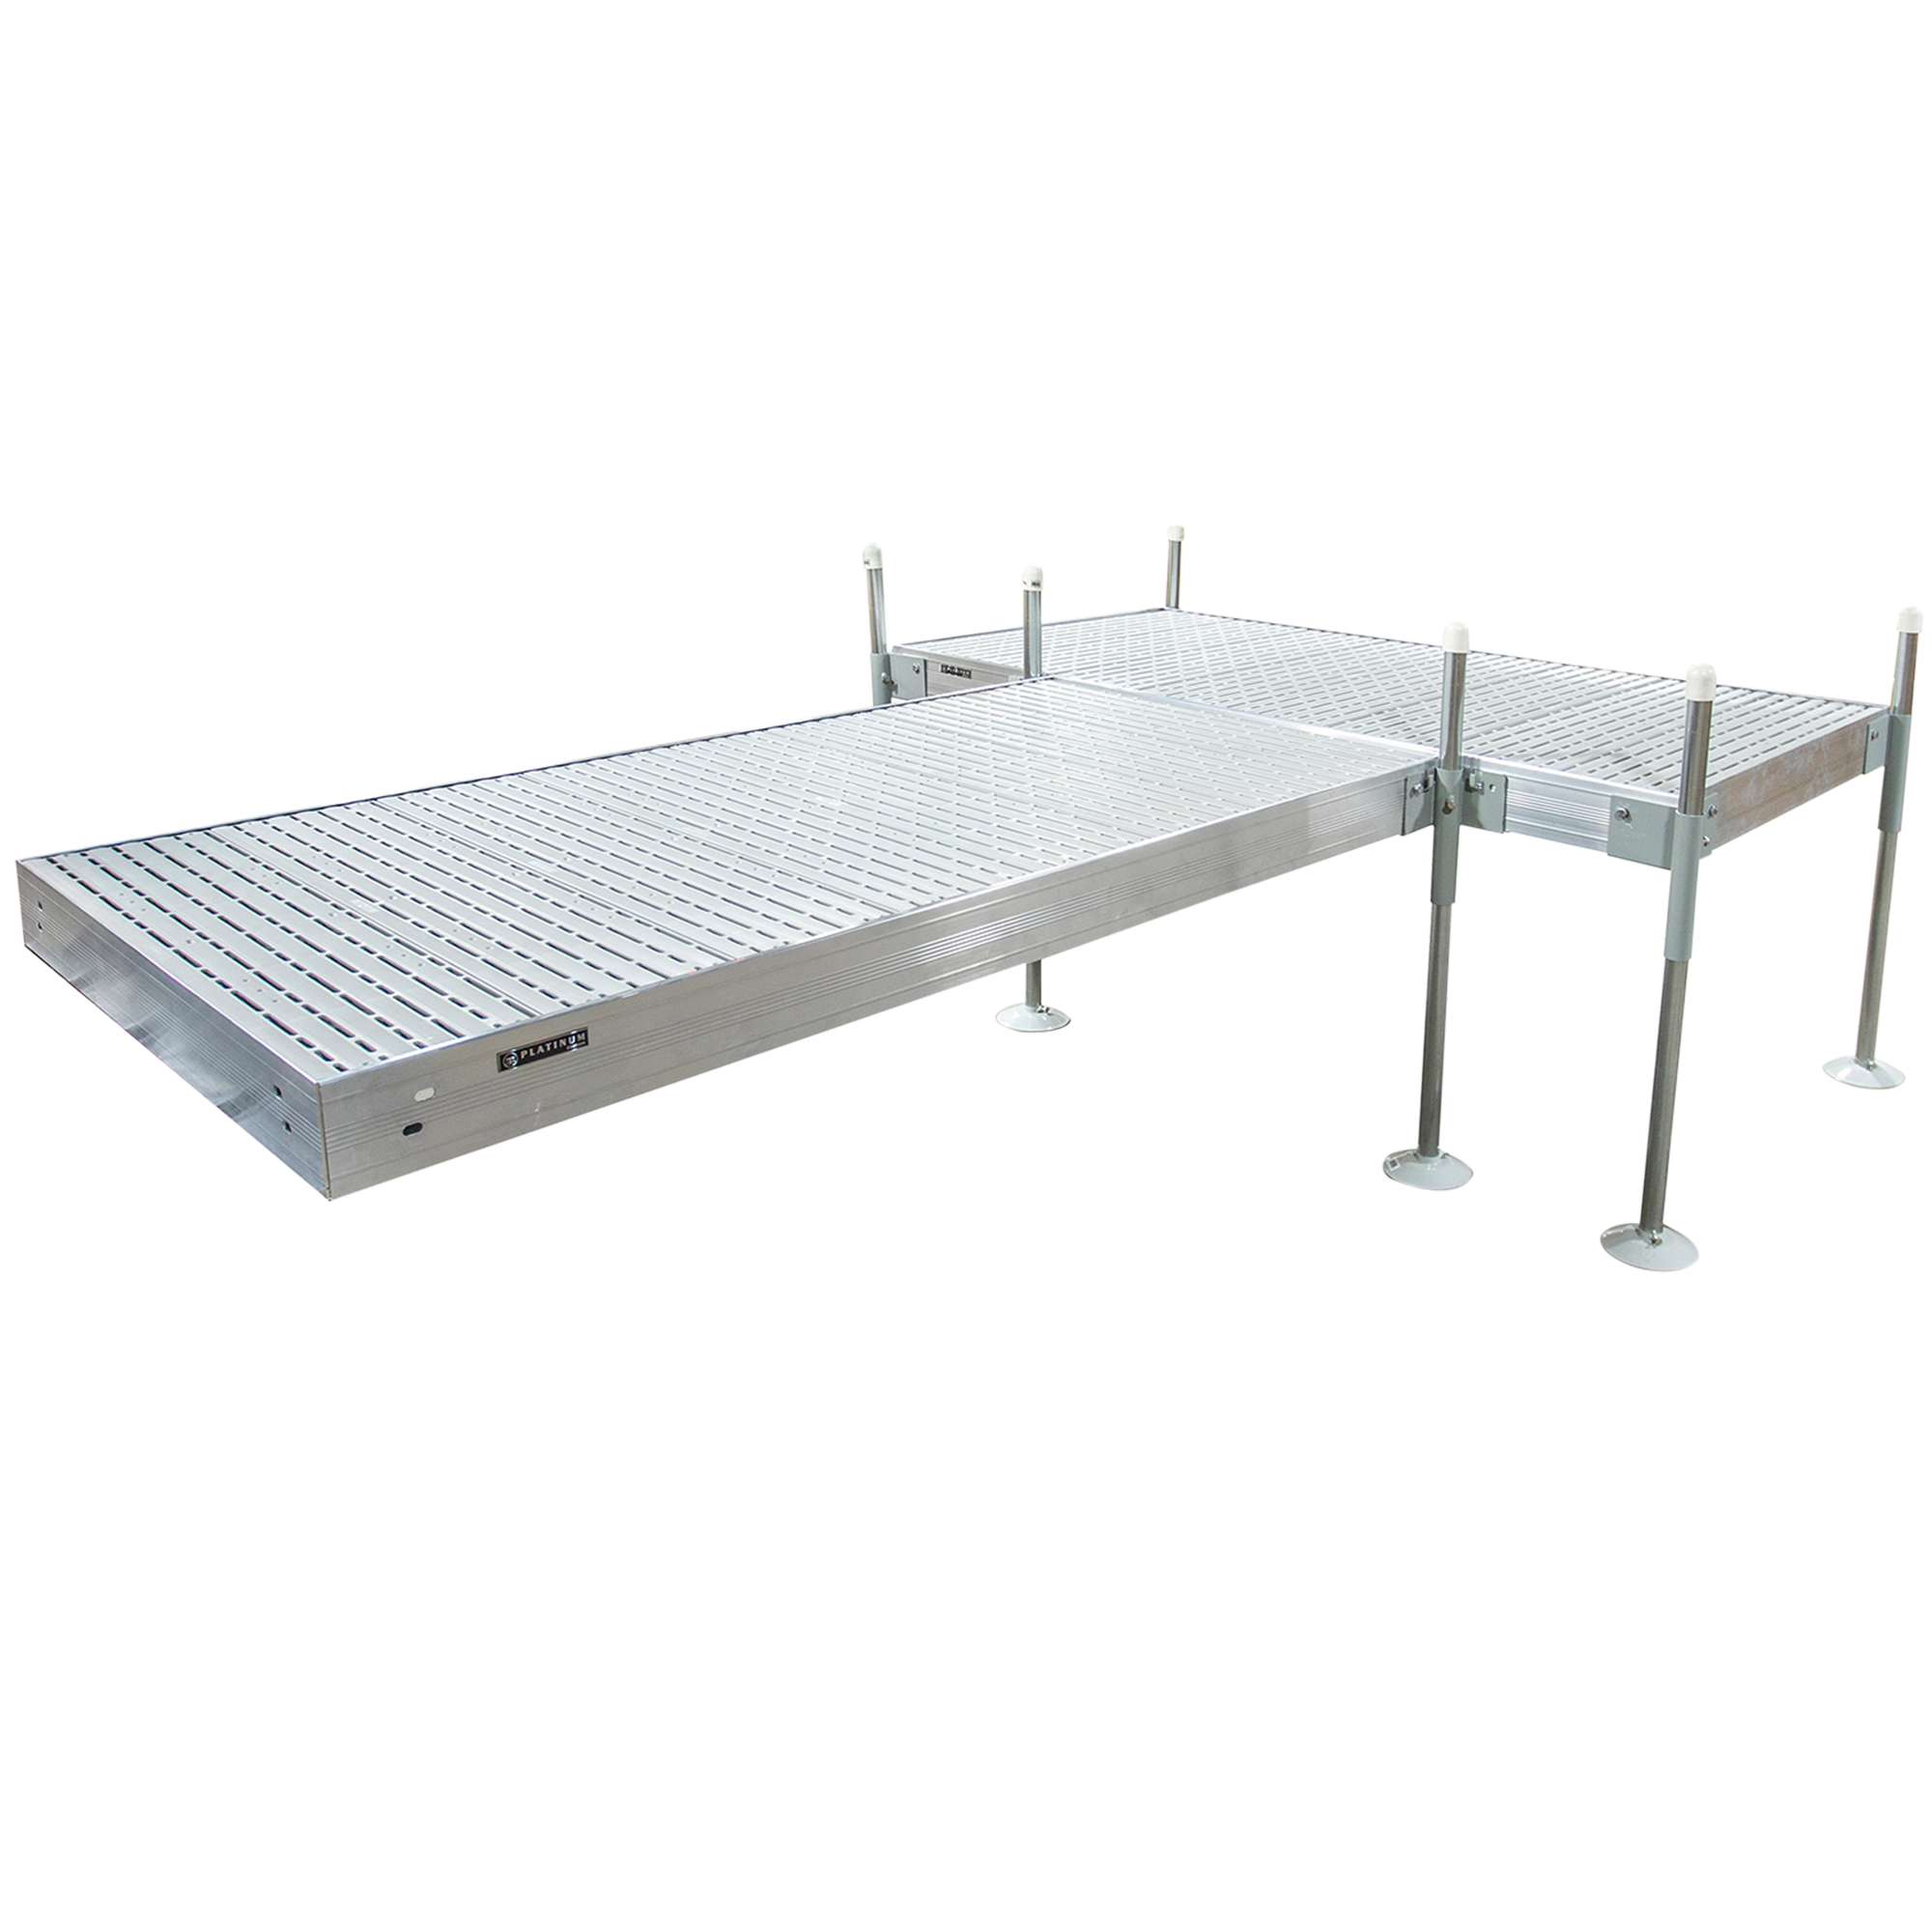 12' T-Shaped Boat Dock System with Aluminum Frame and Gray Titan Decking